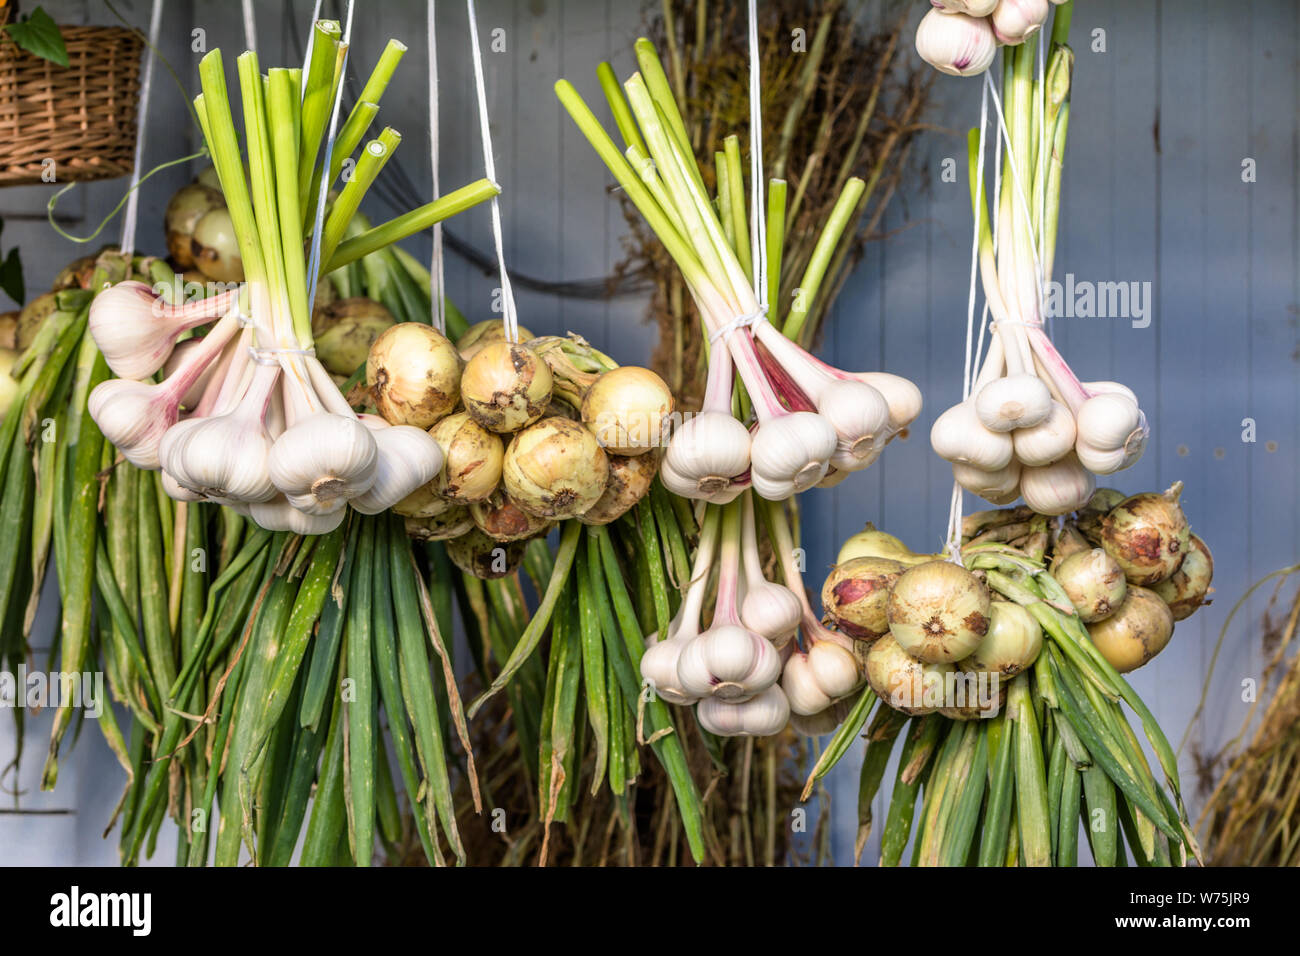 Hanging garlic braid and onion bundles, drying spices and bio vegetables harvested in organic farming by local farmers Stock Photo